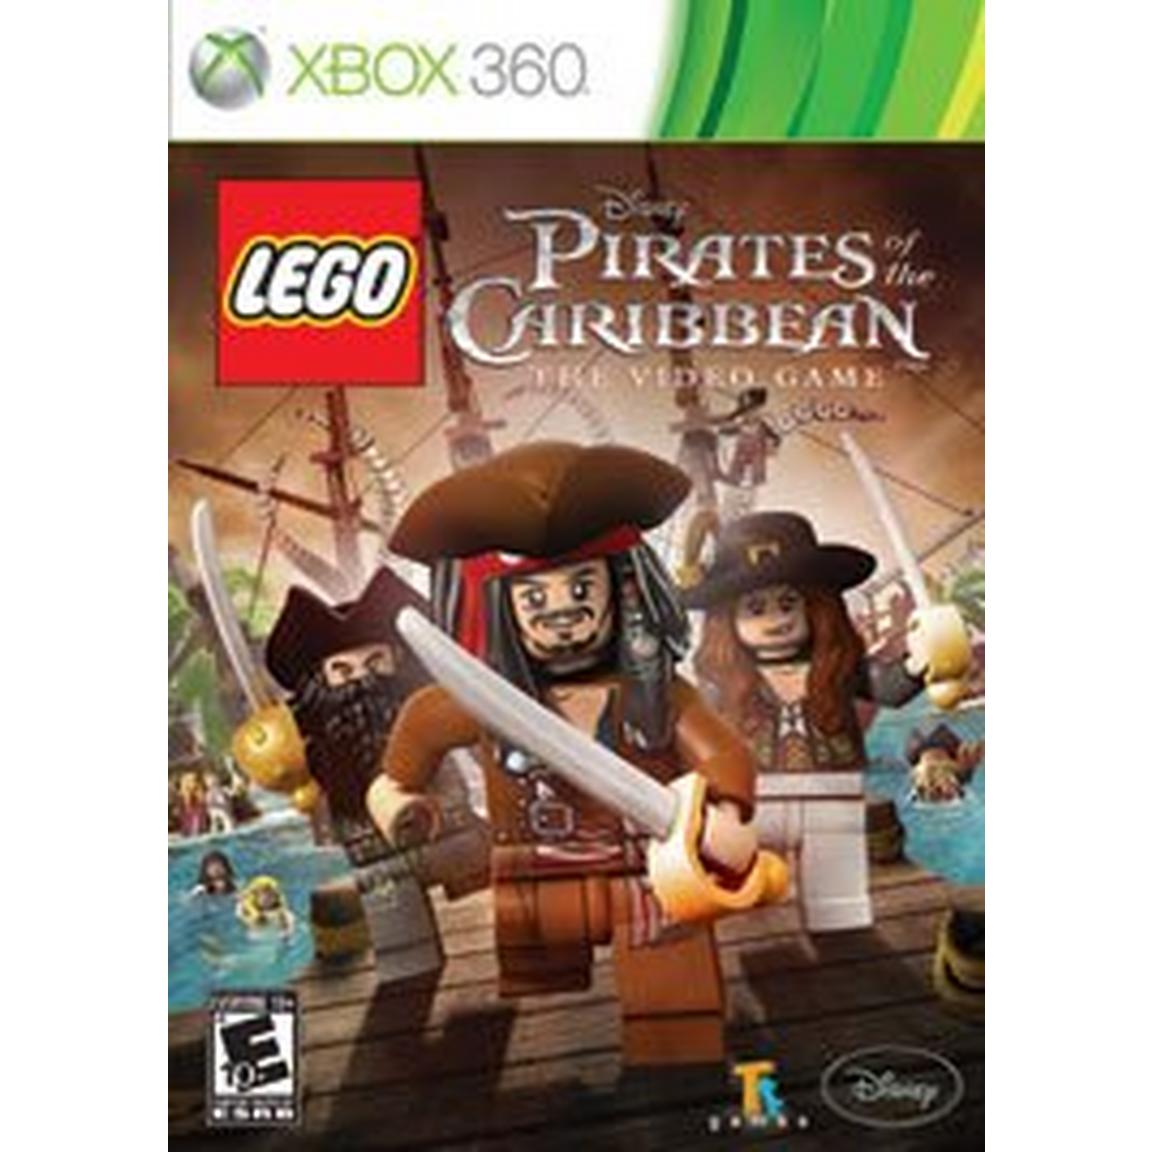 LEGO Pirates of the Caribbean - Xbox 360, Pre-Owned -  Disney